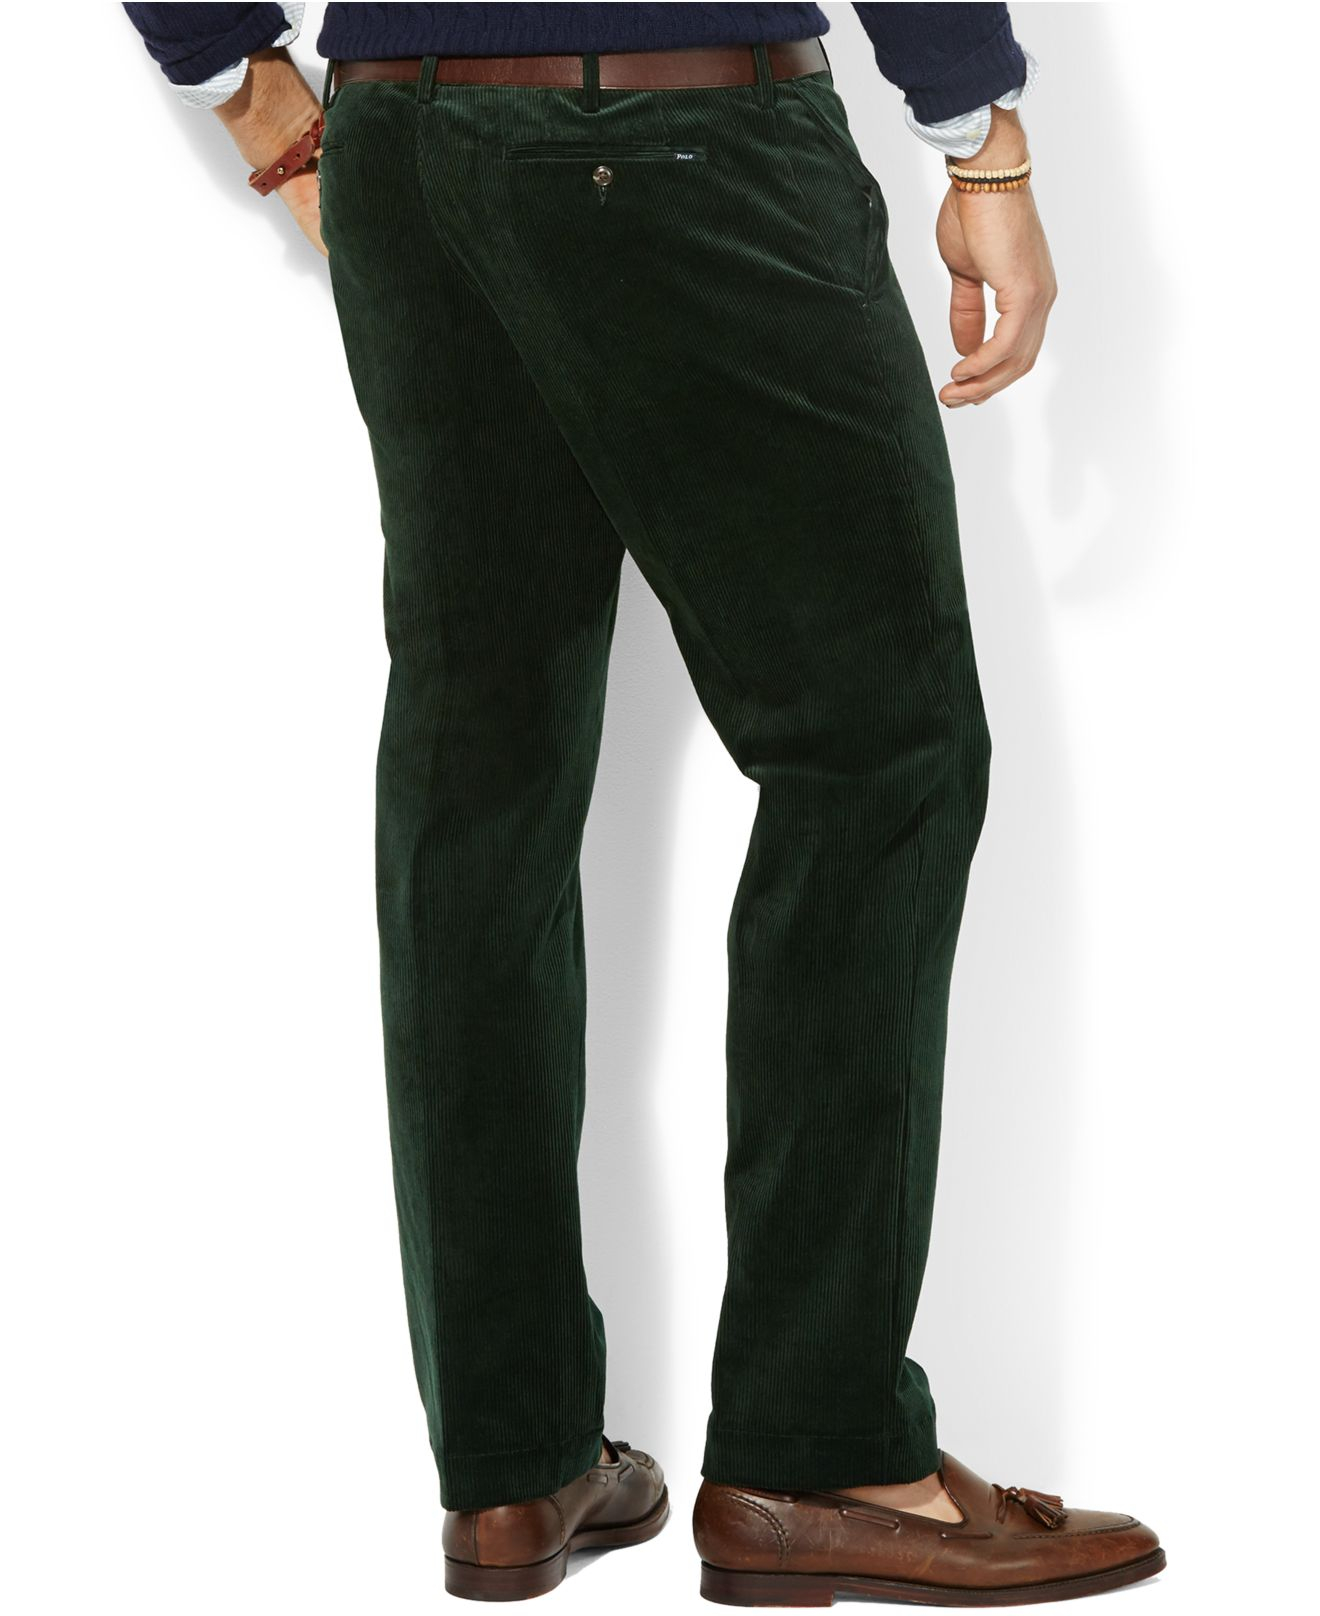 Polo ralph lauren Big And Tall Ten Wale Thick Corduroy Pants in Green ...